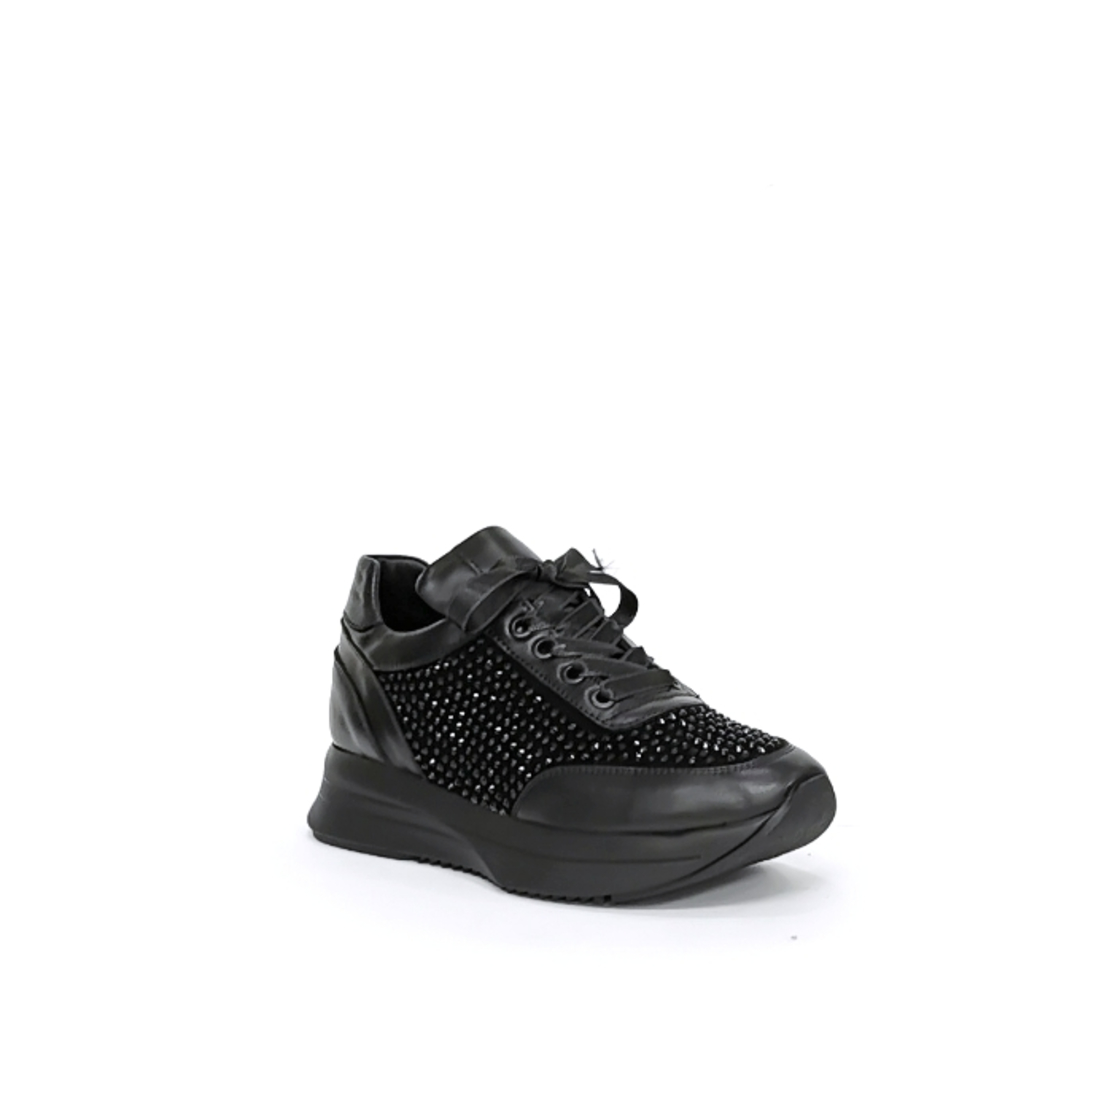 Women's sneakers made of natural leather with an anatomical insole in black/71614